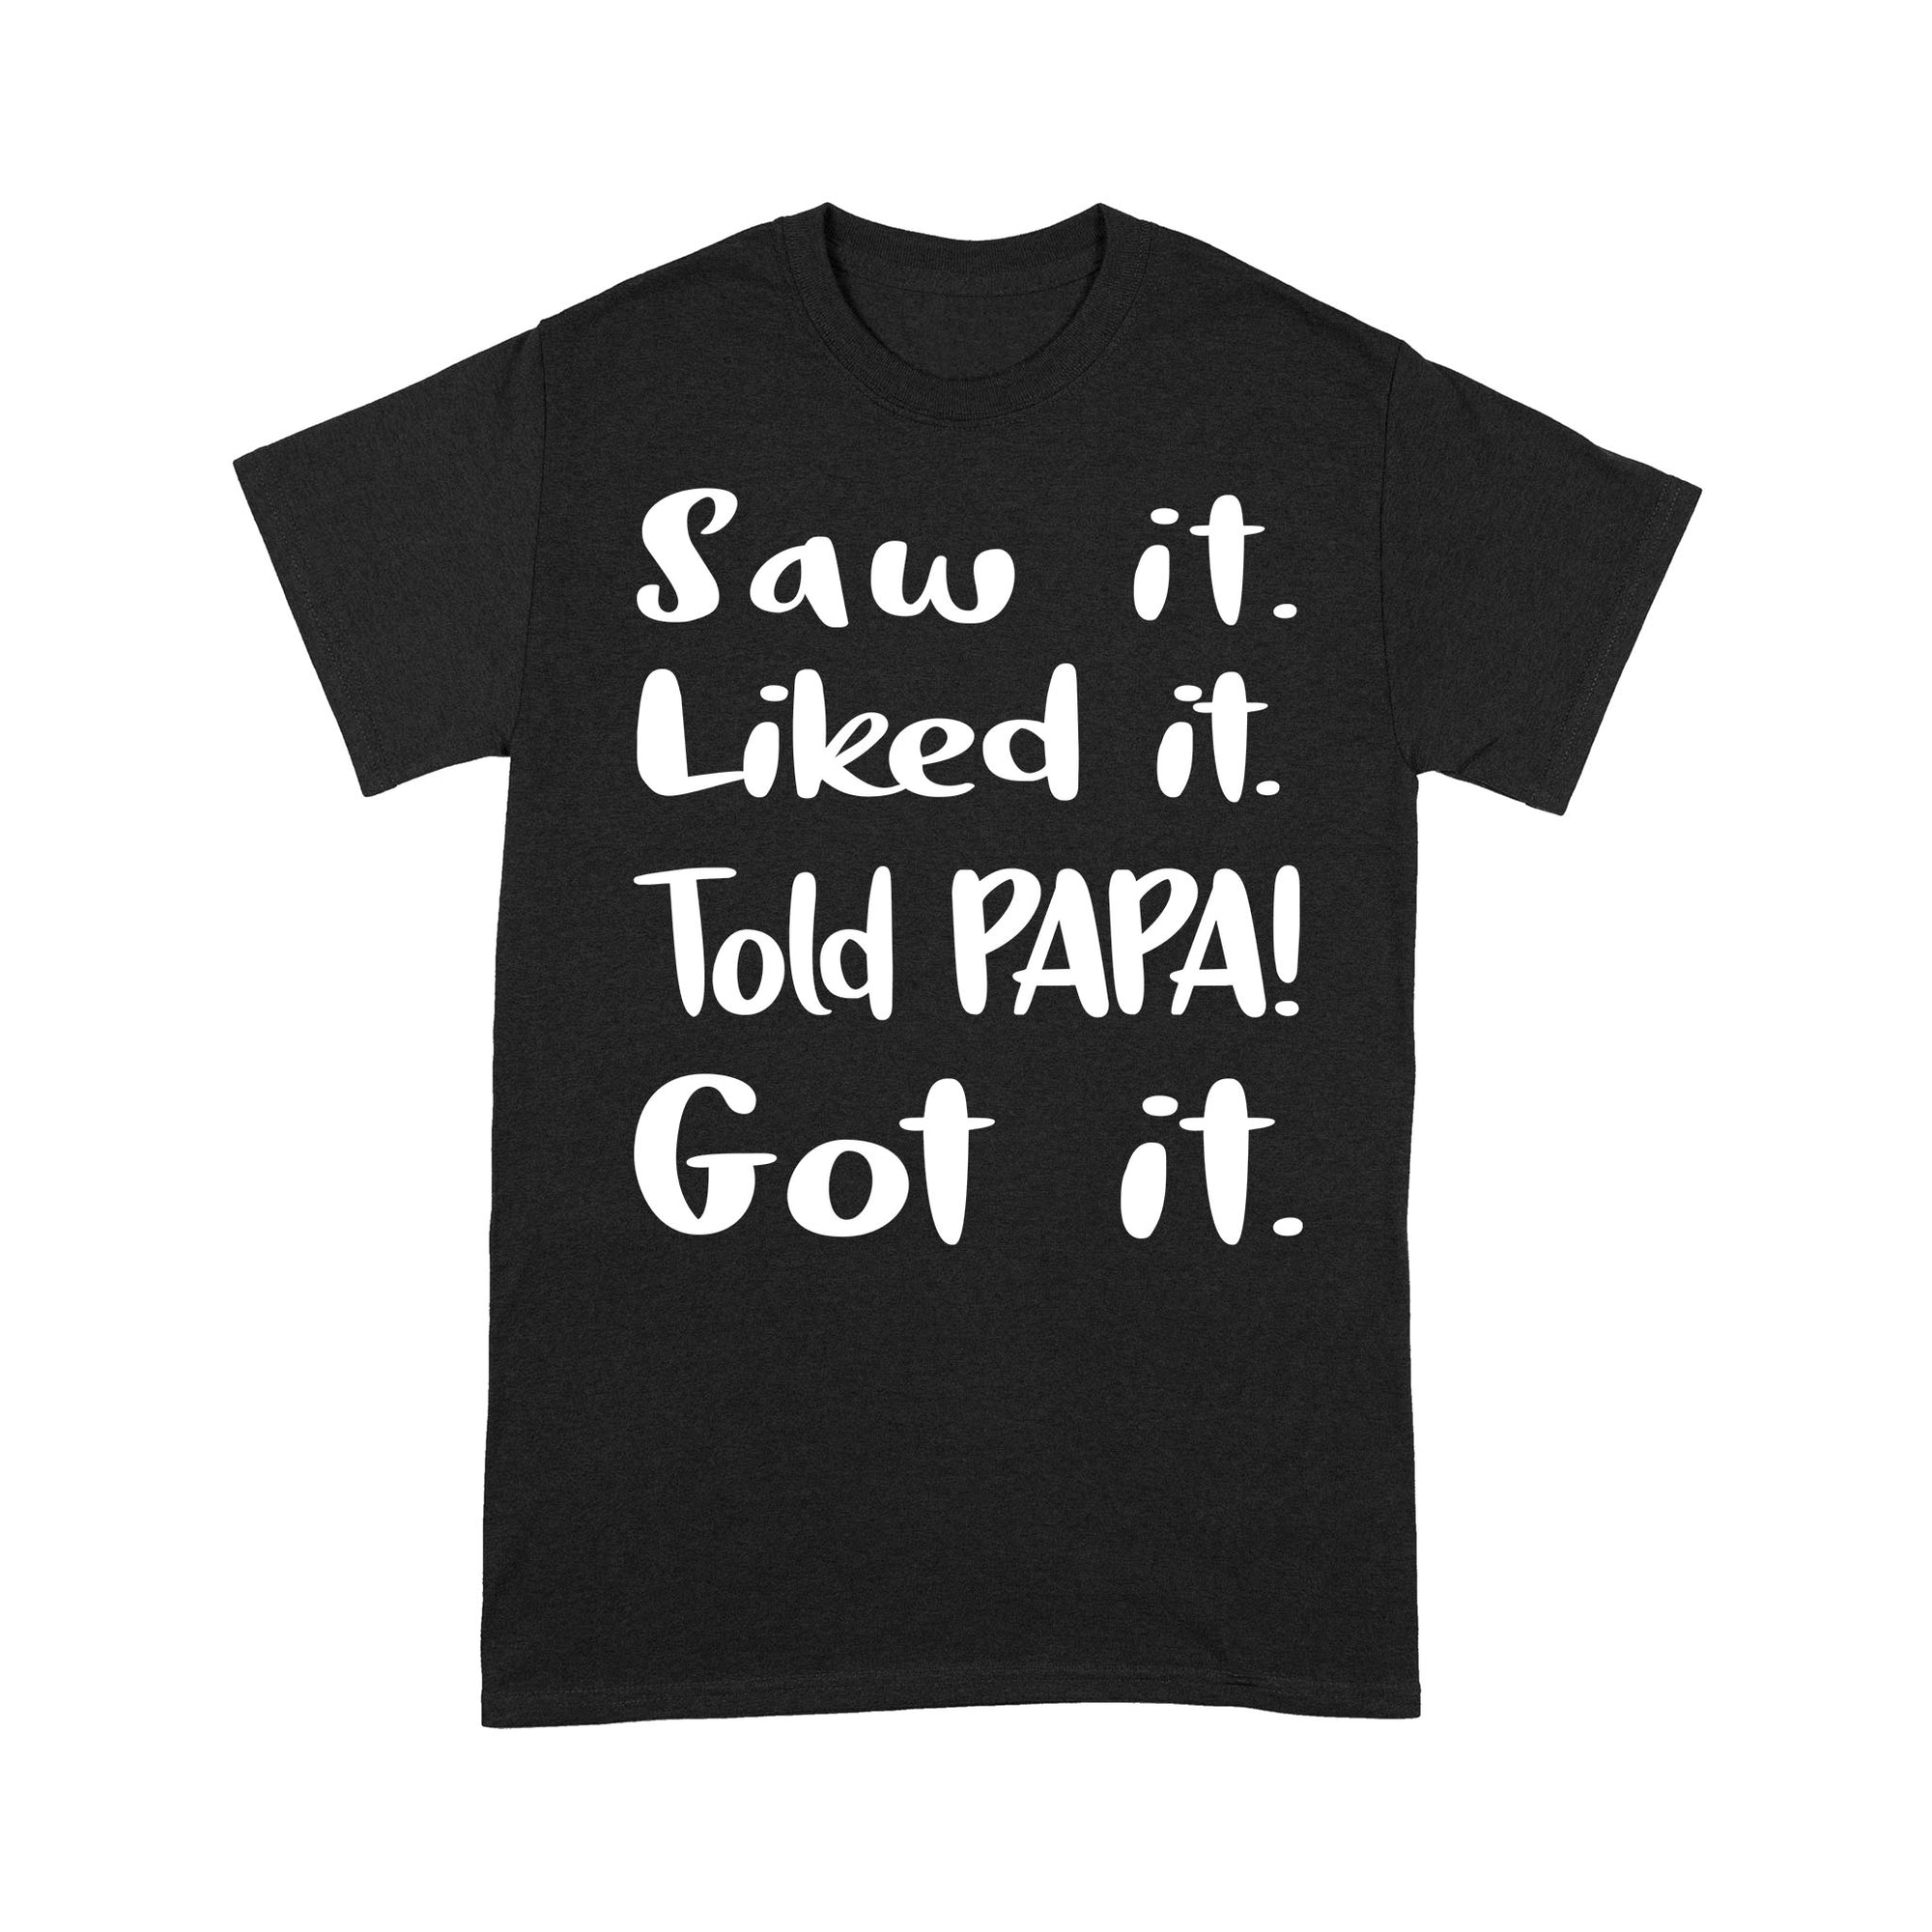 Funny Dad Grandpa Quotes Sayings Saw It Liked It Told Papa Got It Family gift Ideas Custom Design For men and Women Boys and Girls - Standard T-shirt